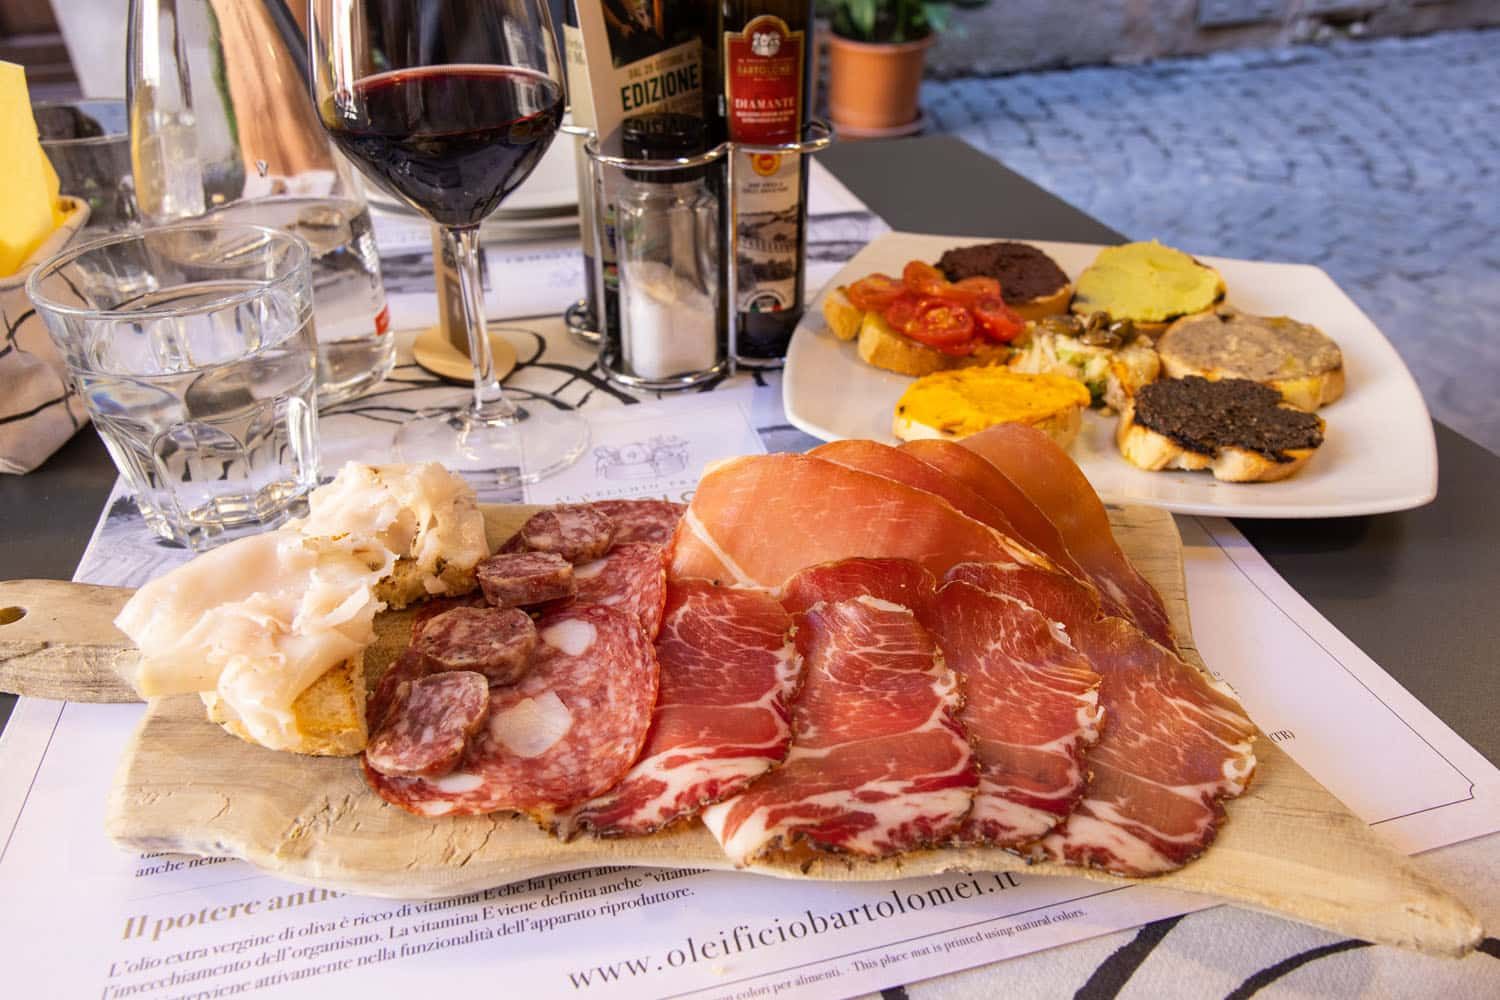 Where to Eat in Orvieto